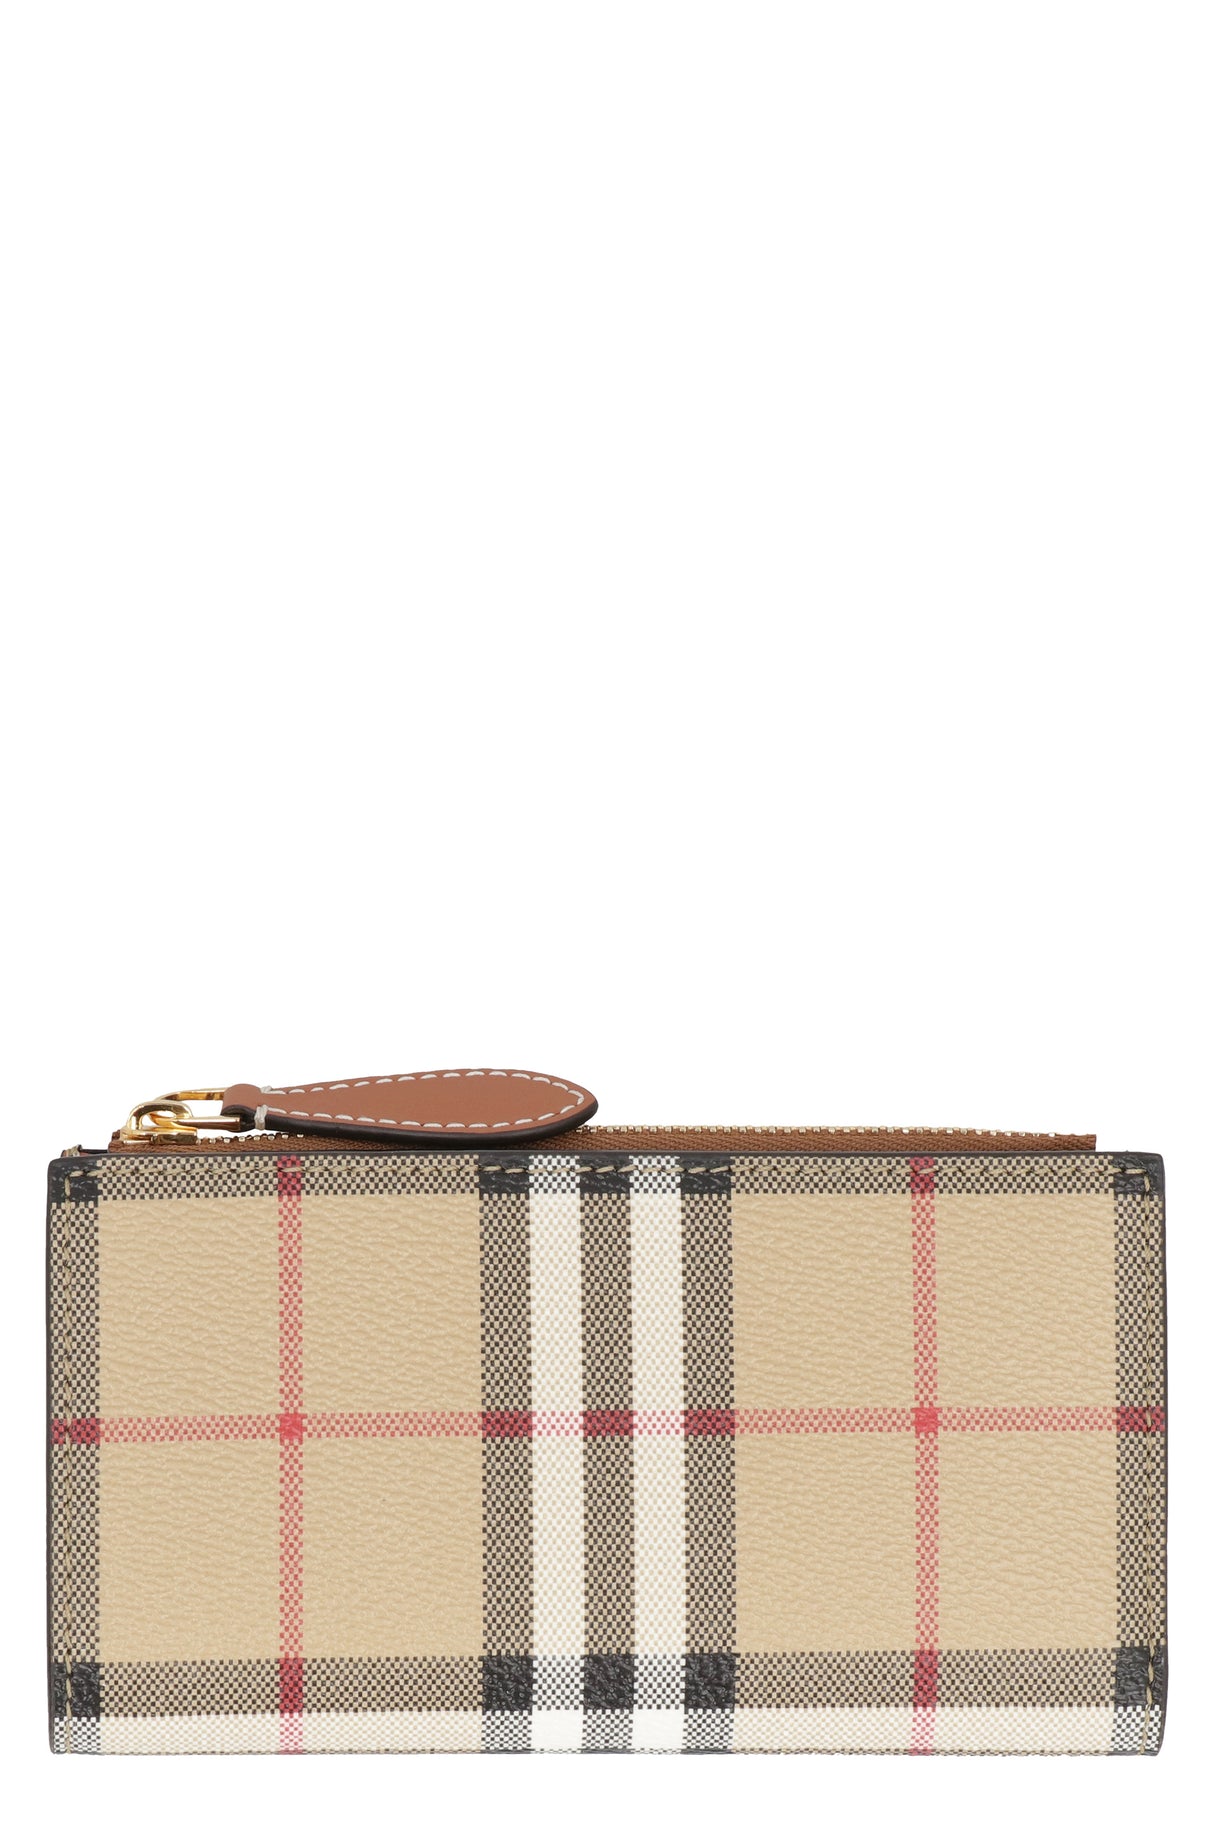 BURBERRY Beige Check Print Wallet for Women